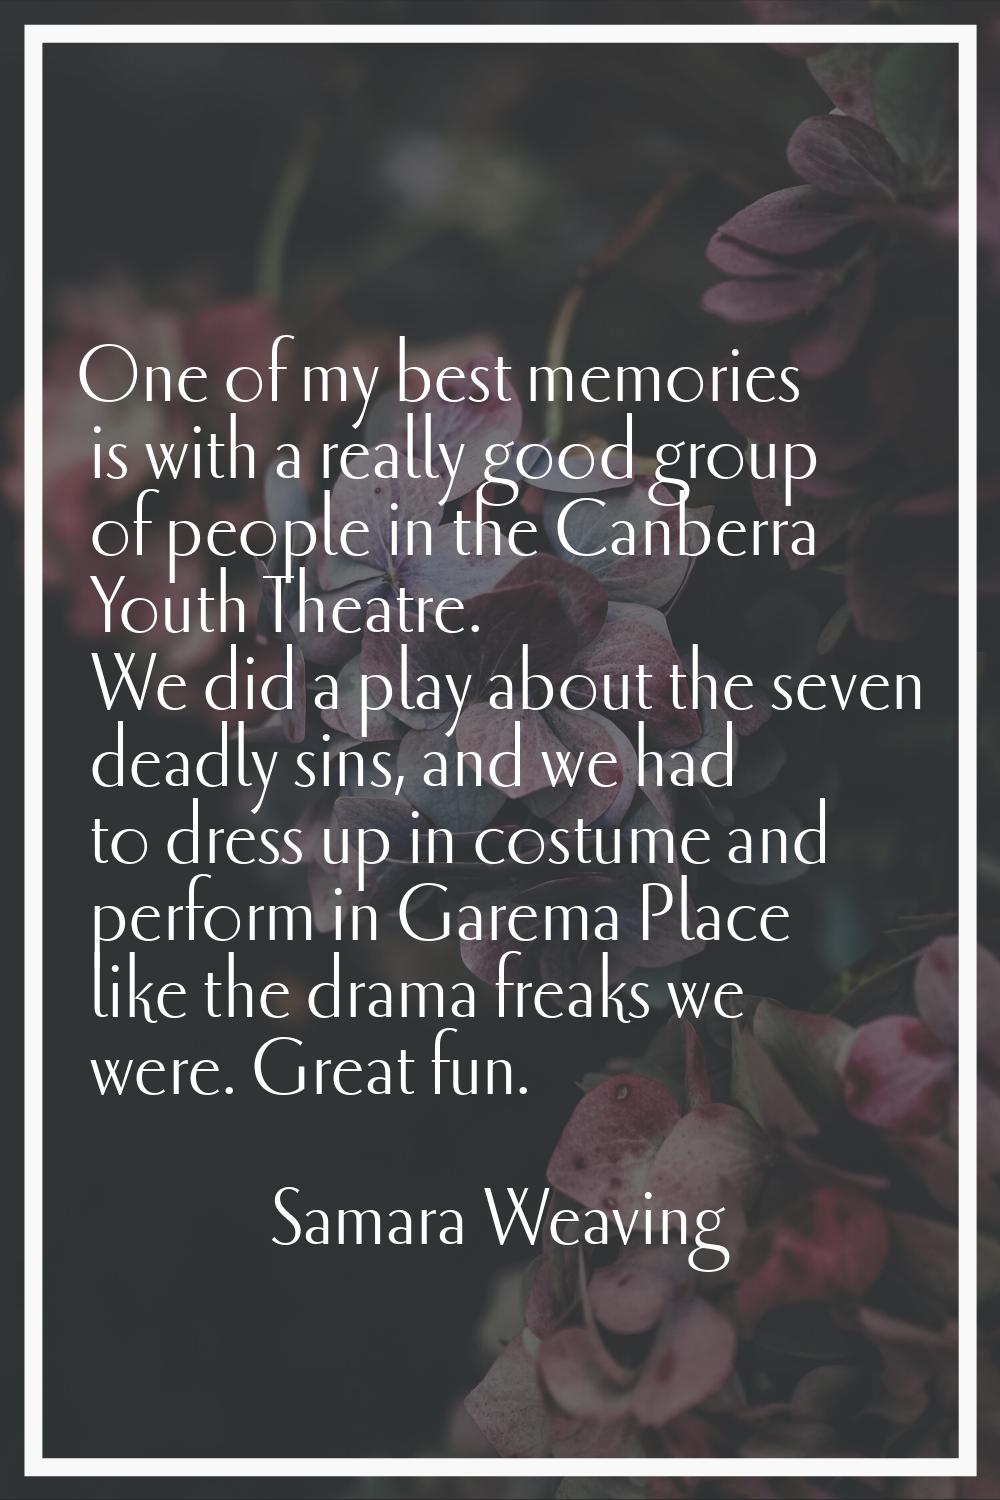 One of my best memories is with a really good group of people in the Canberra Youth Theatre. We did